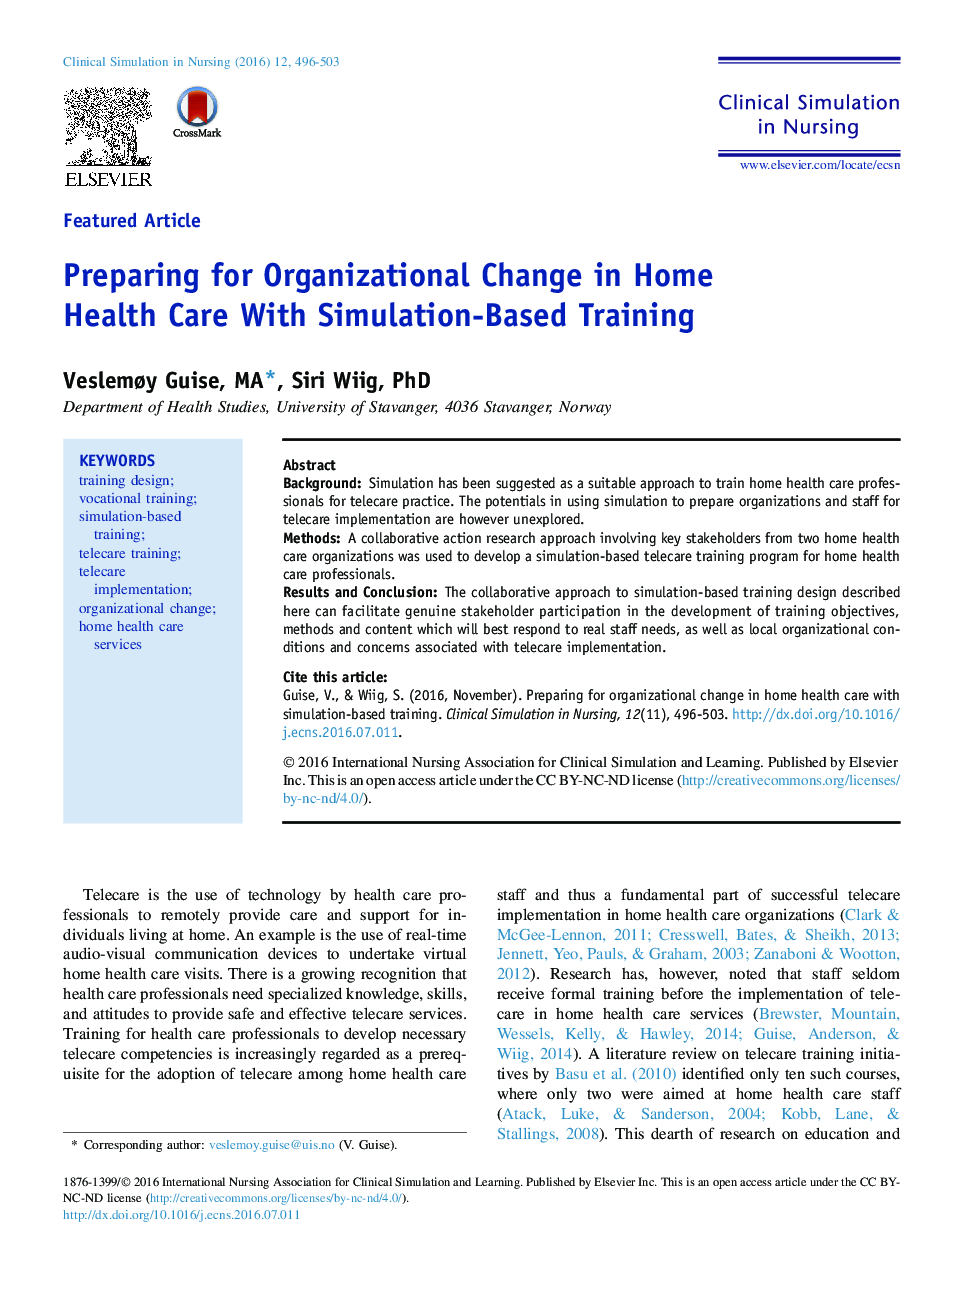 Featured ArticlePreparing for Organizational Change in Home Health Care With Simulation-Based Training